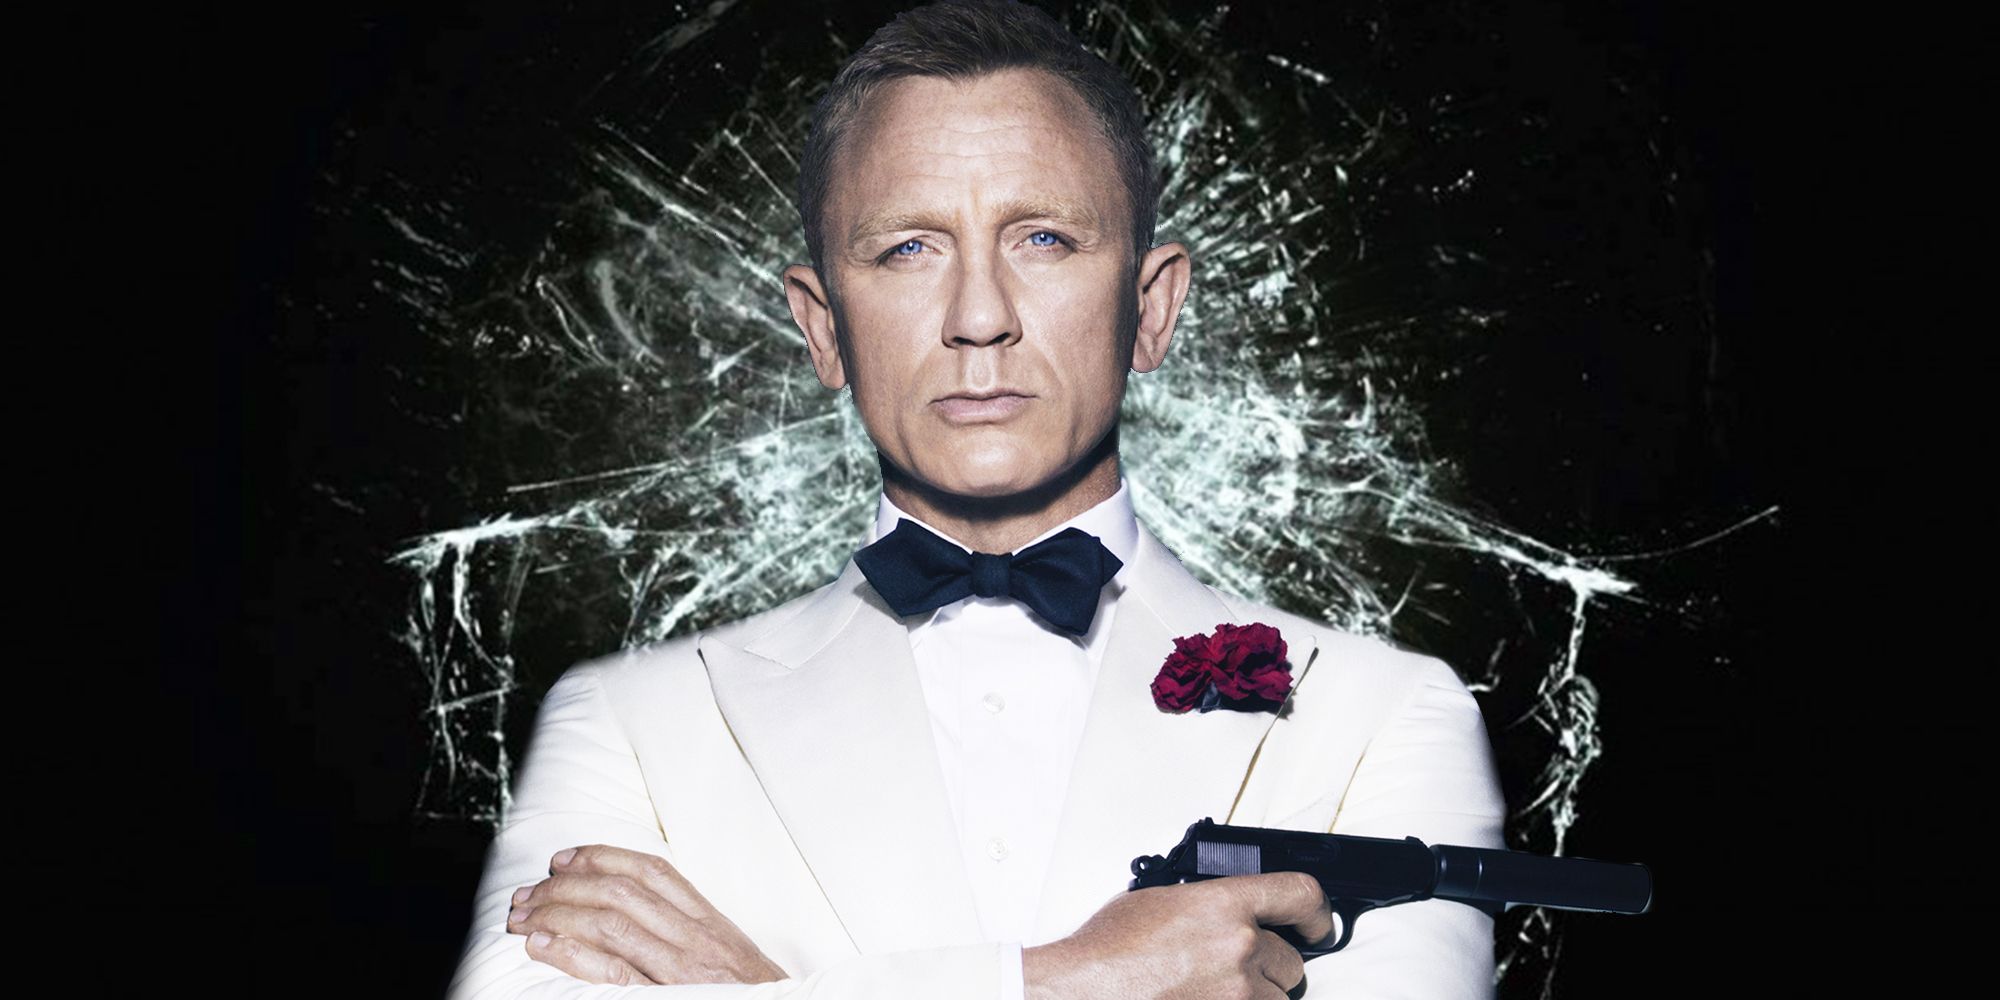 Daniel Craig as James Bond stands in front of the Spectre symbol